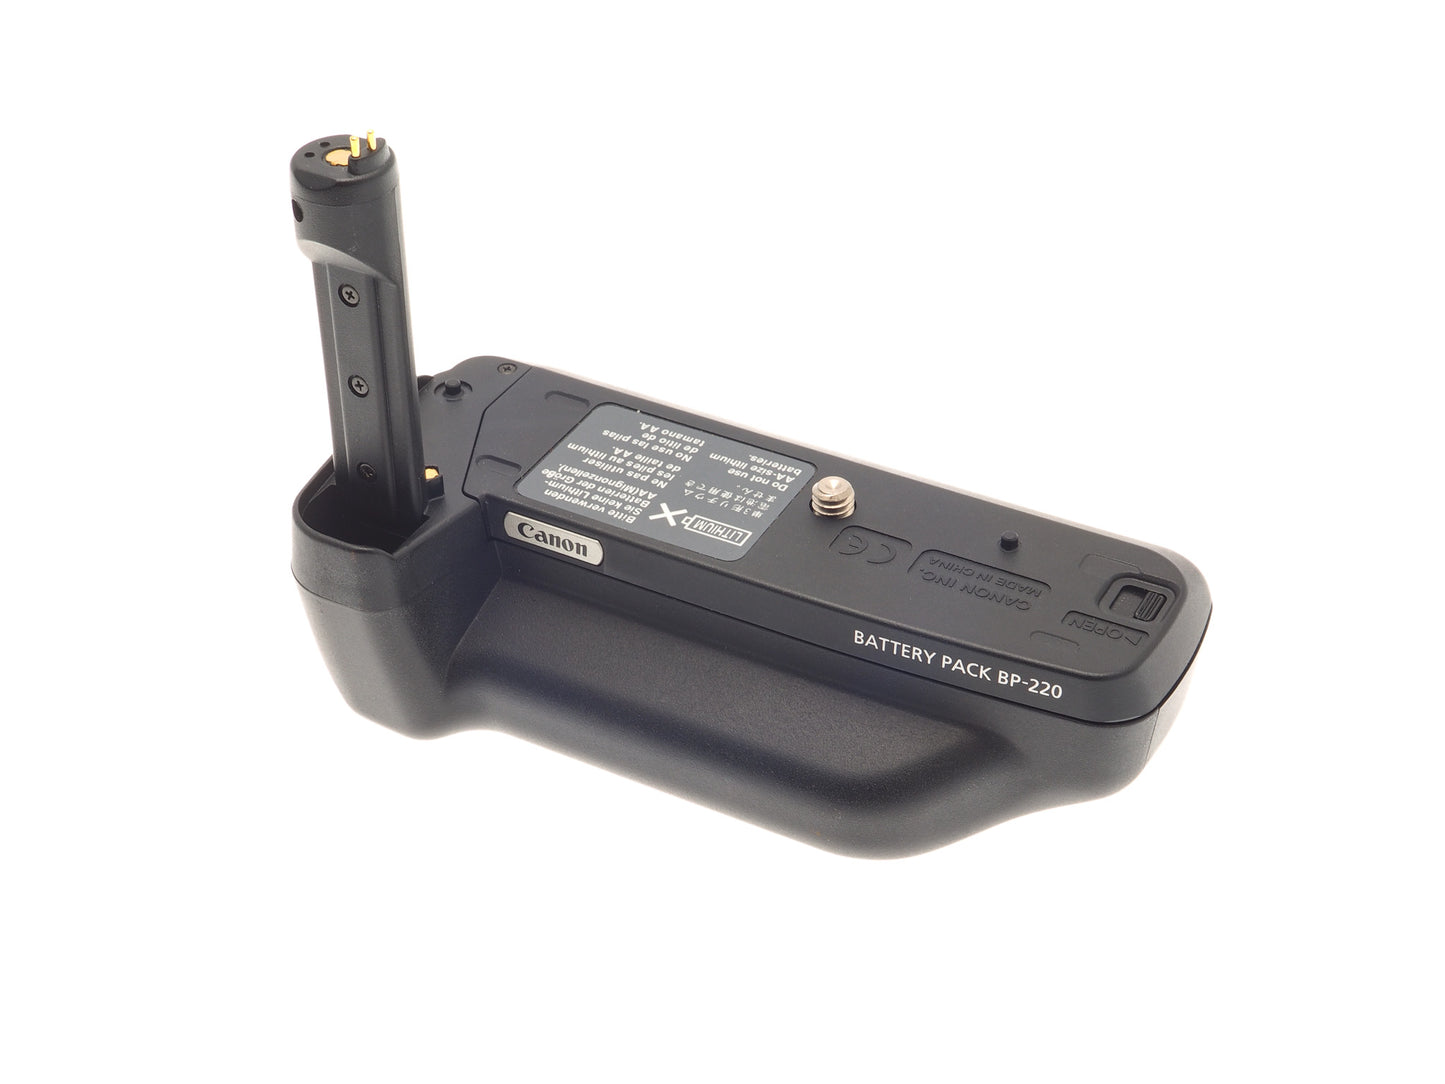 Canon BP-220 Battery Pack - Accessory